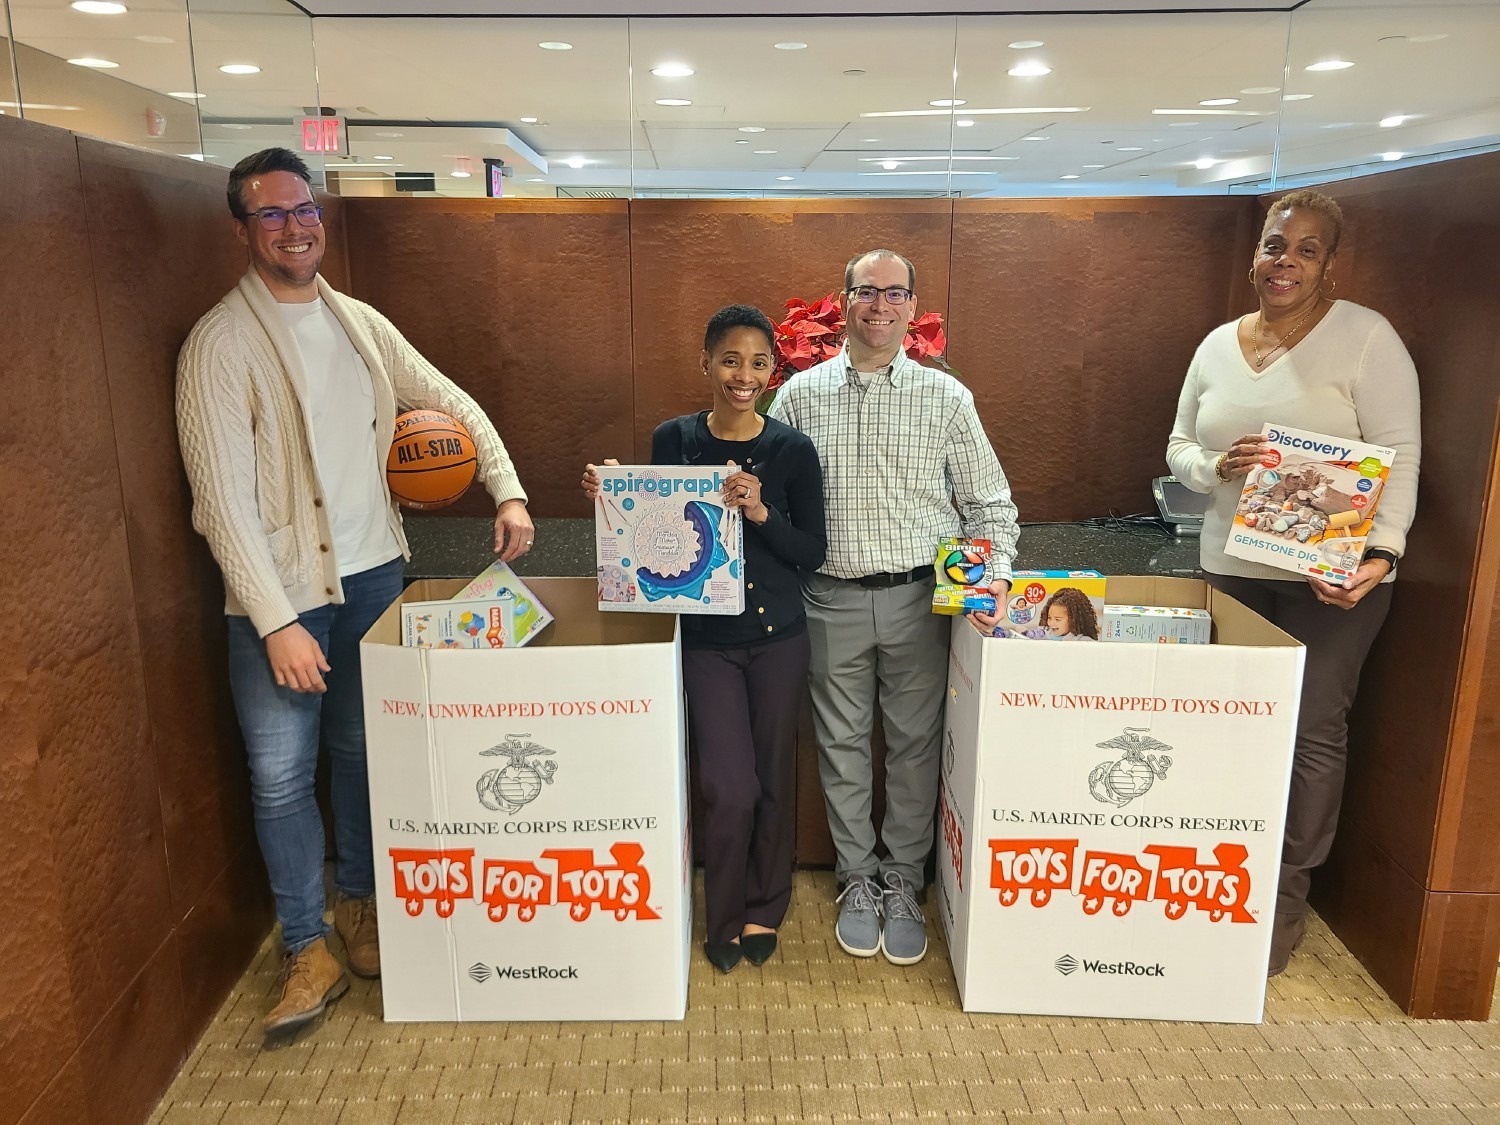 AGNC employees lead our volunteerism and community outreach efforts, such as holiday toy drives for Toys for Tots.